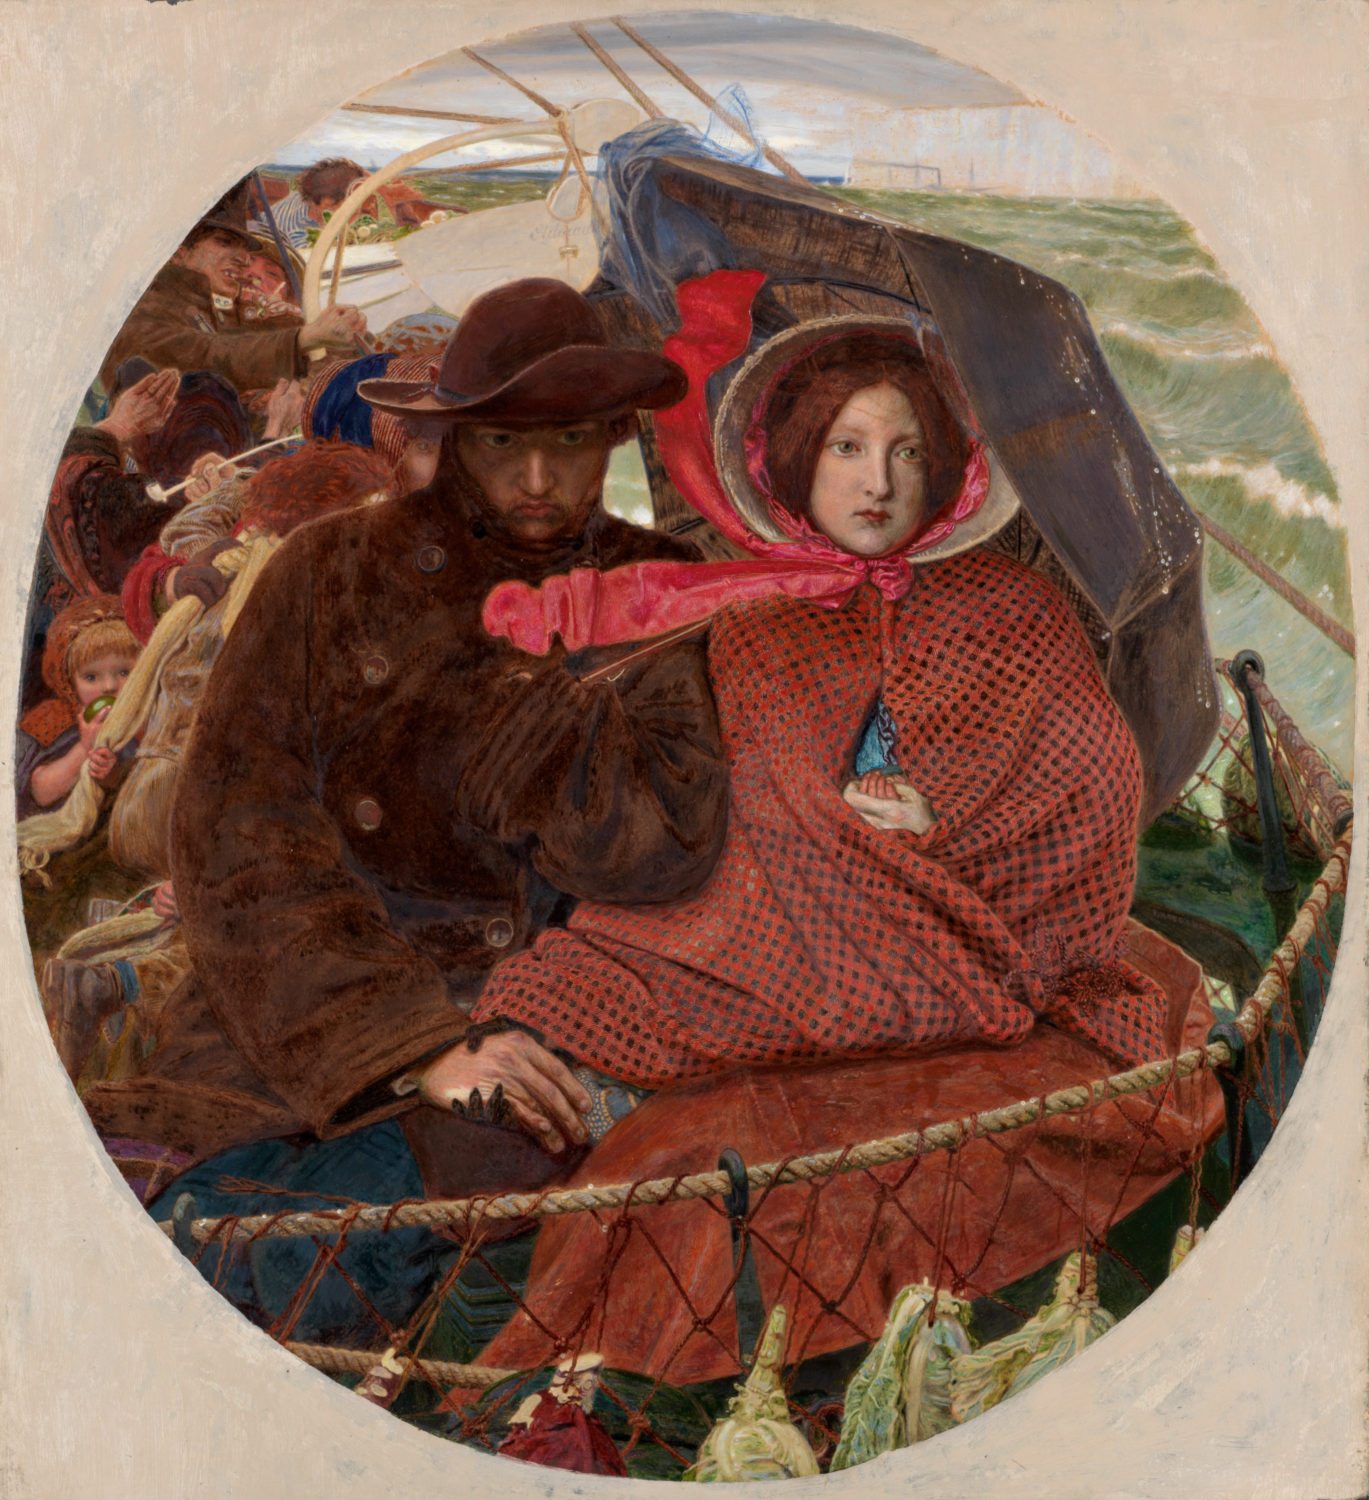 A painting showing a couple and there baby in a ship making a voyage across the sea painted by Ford Madox Brown